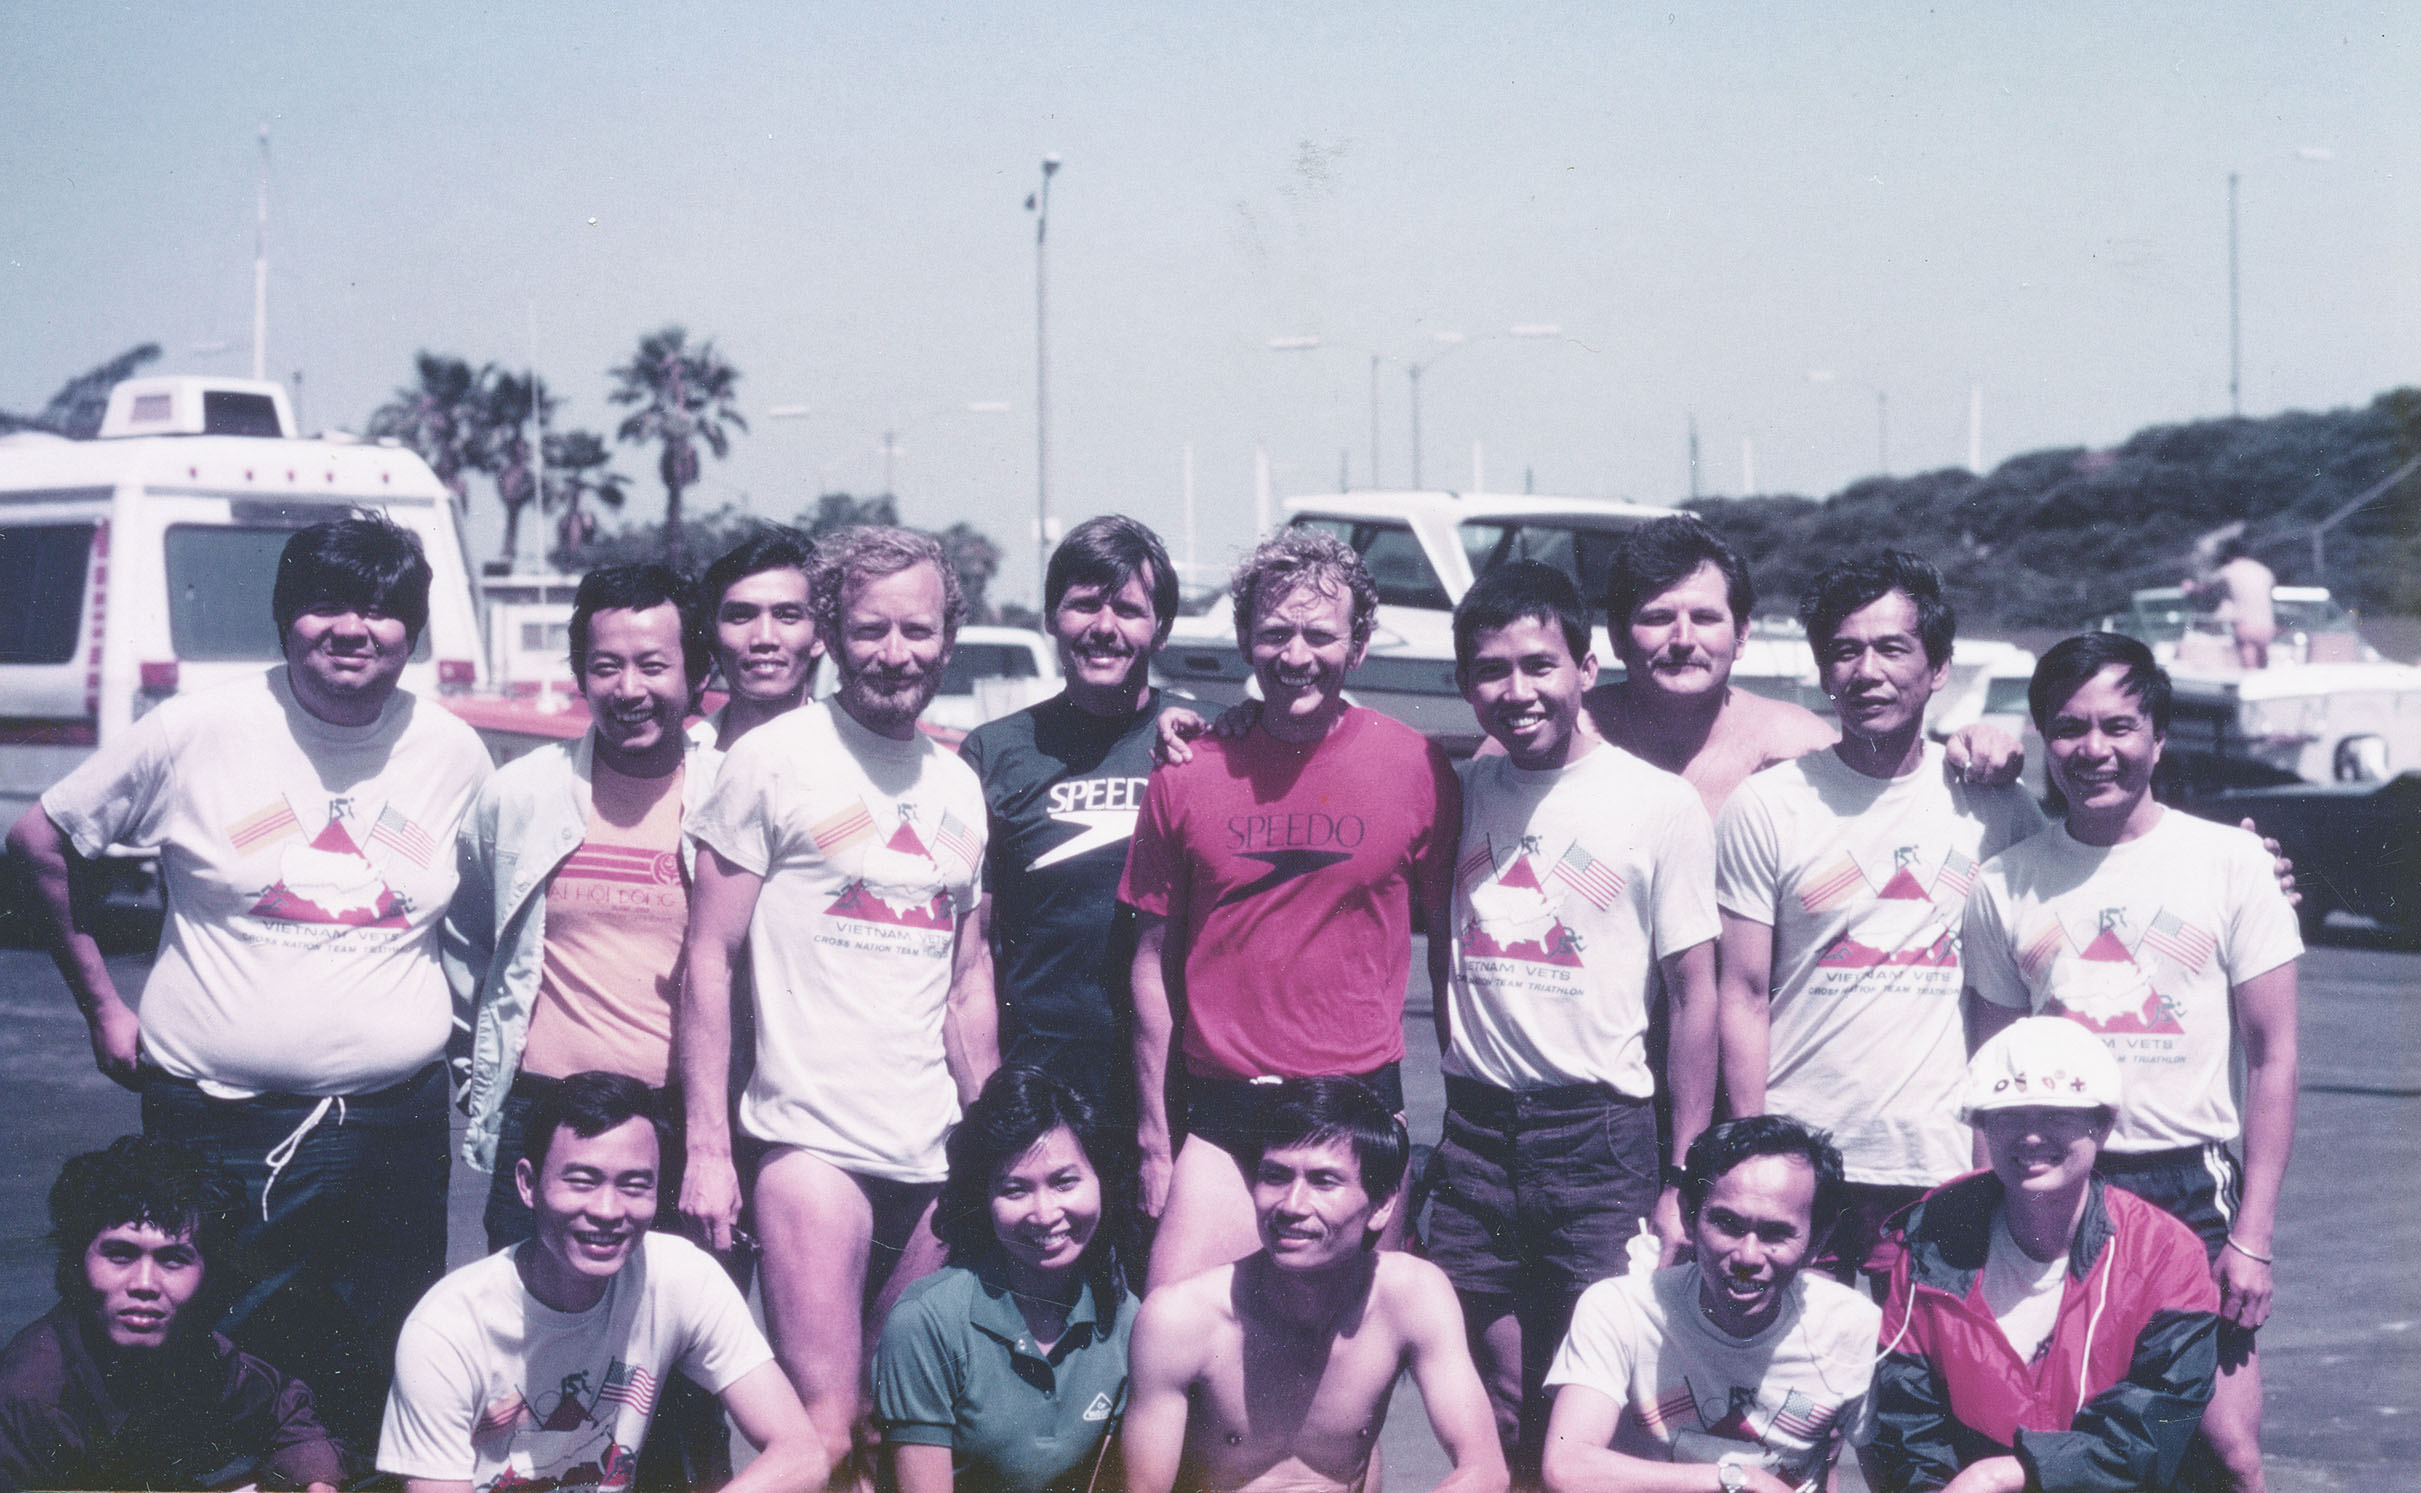 The four-veteran team poses with supporters on June 20, 1984, after three of them, Jim and Ron Barker and Langford, swam a 4-mile relay off Long Beach, California, to kick off the triathlon. / Courtesy Jim Barker